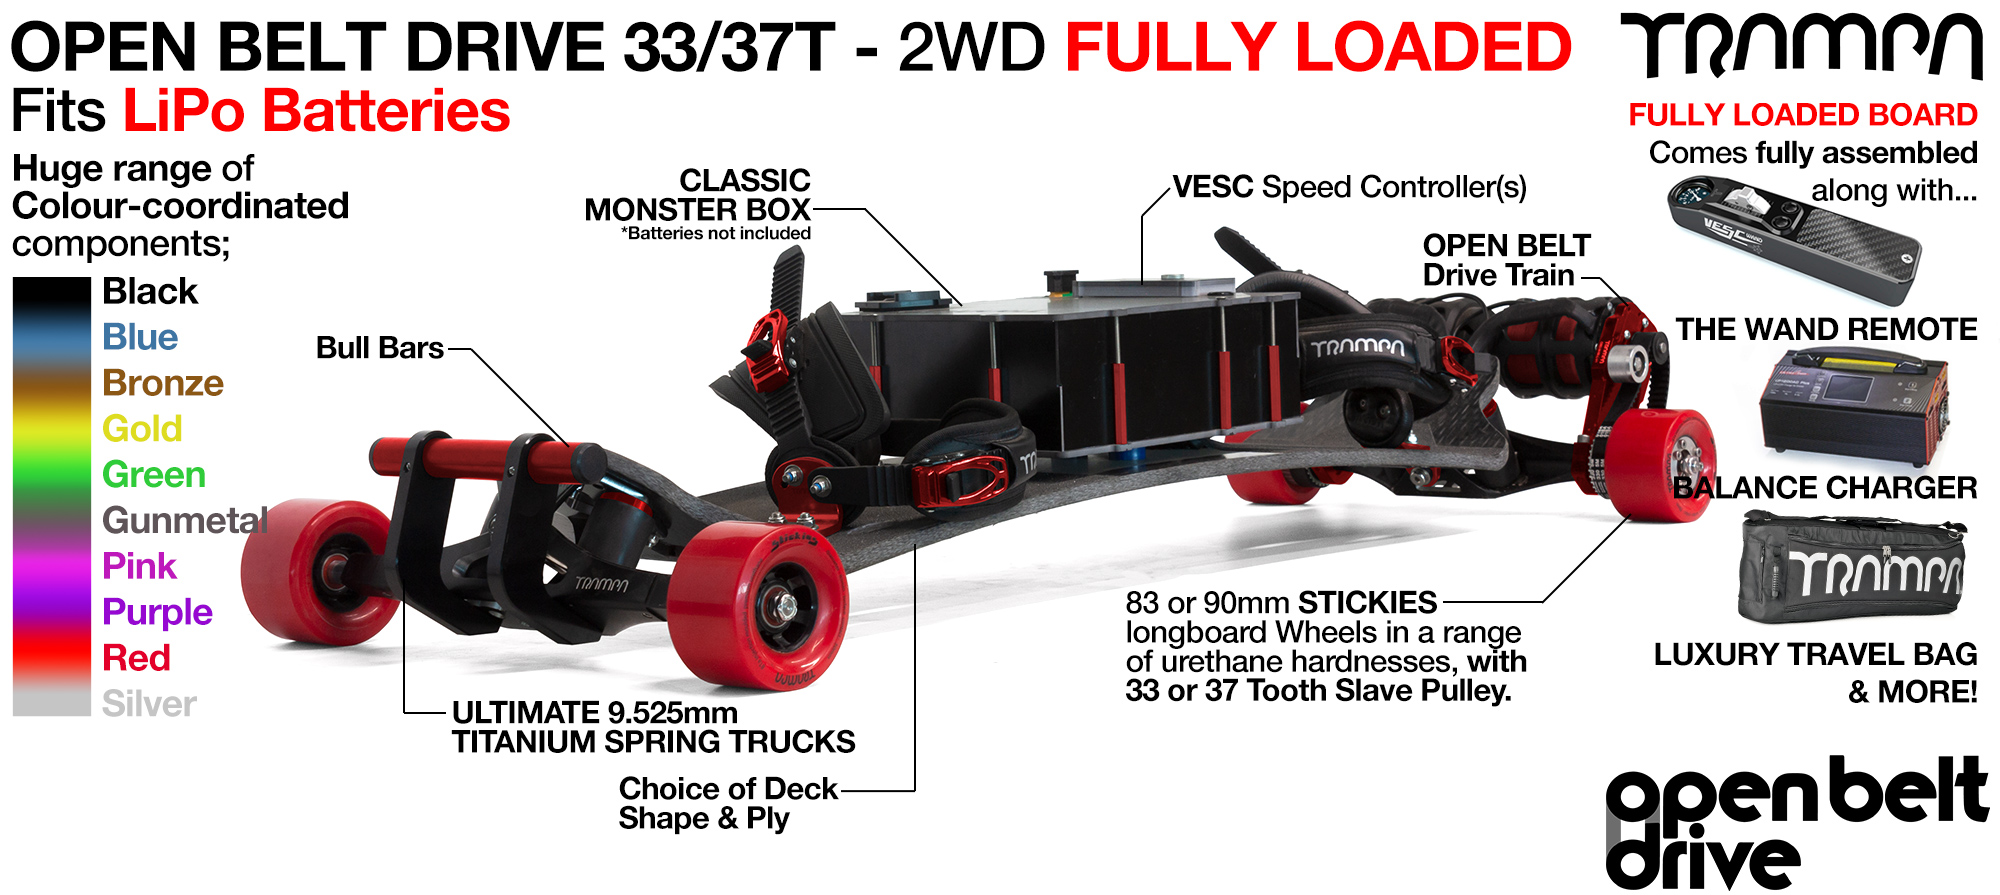 2WD 66T Open Belt Drive TRAMPA E-MTB with 83 or 90mm STICKIES Wheels & 33/37 Tooth Pulleys - FULLY LOADED Li-Po